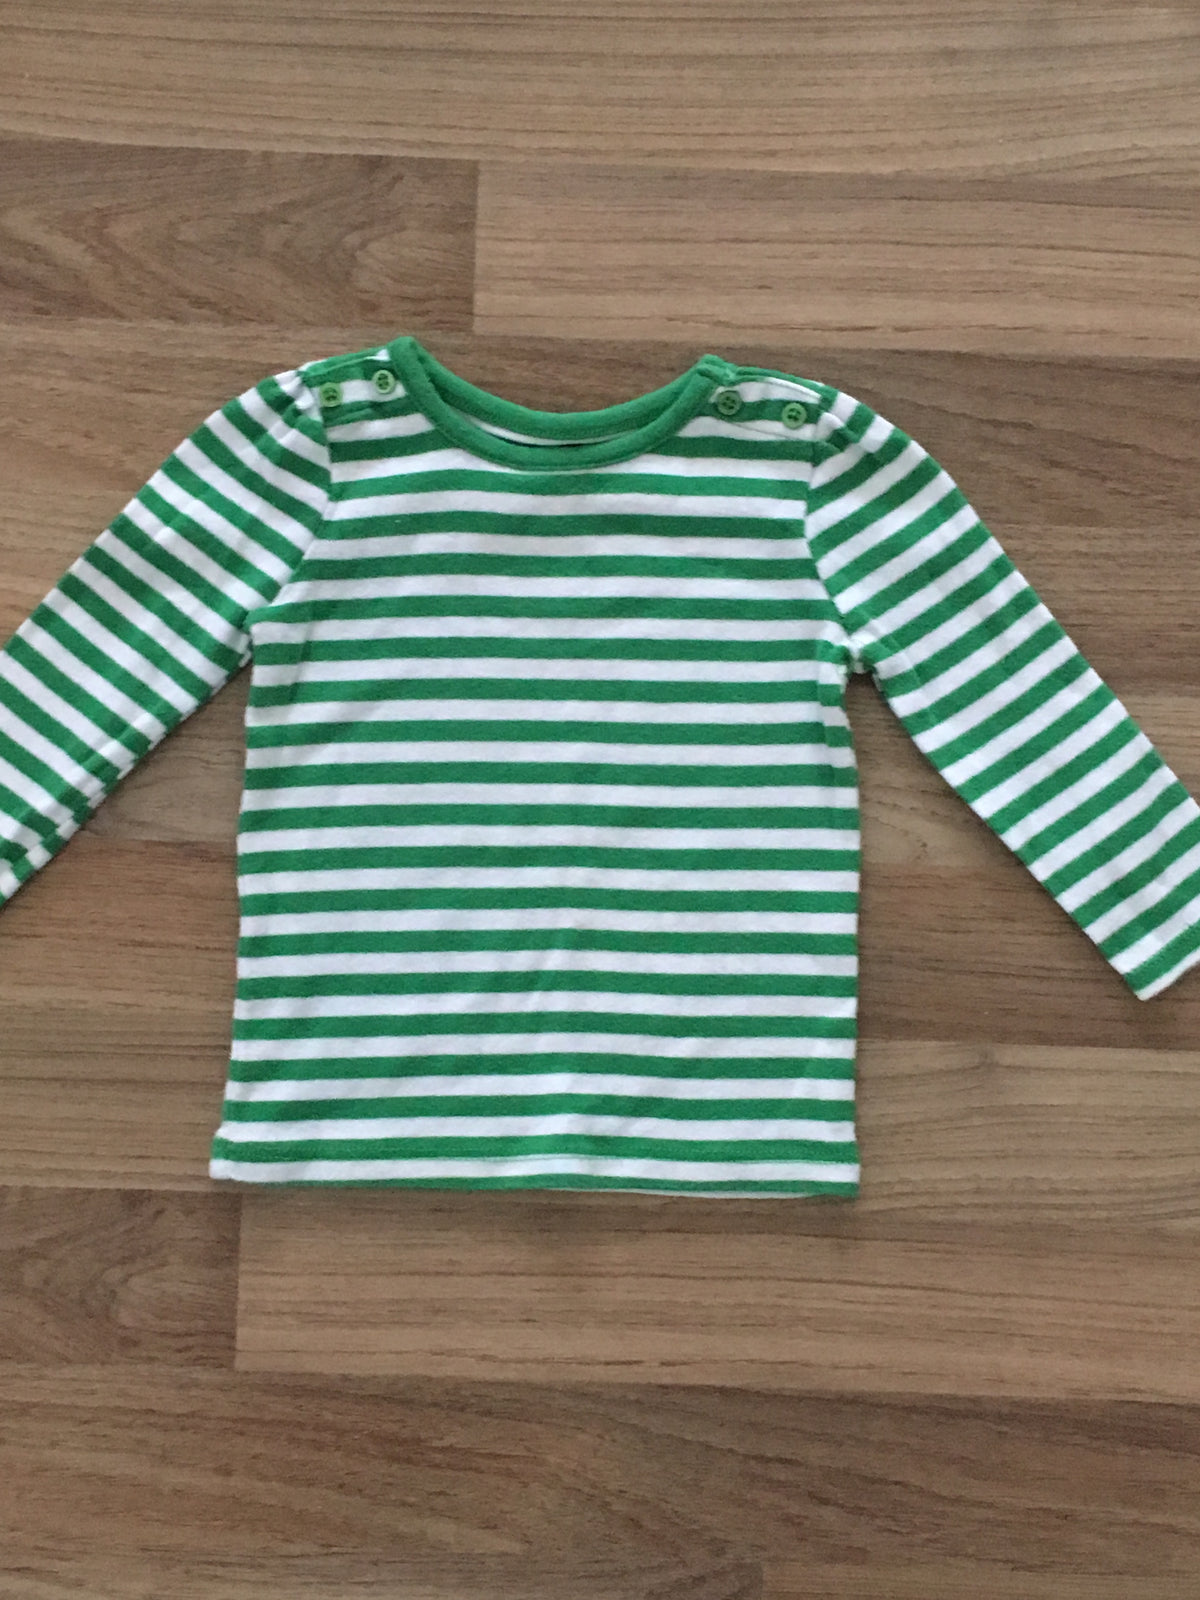 Long Sleeve Striped Top (Girls Size 12-18M)